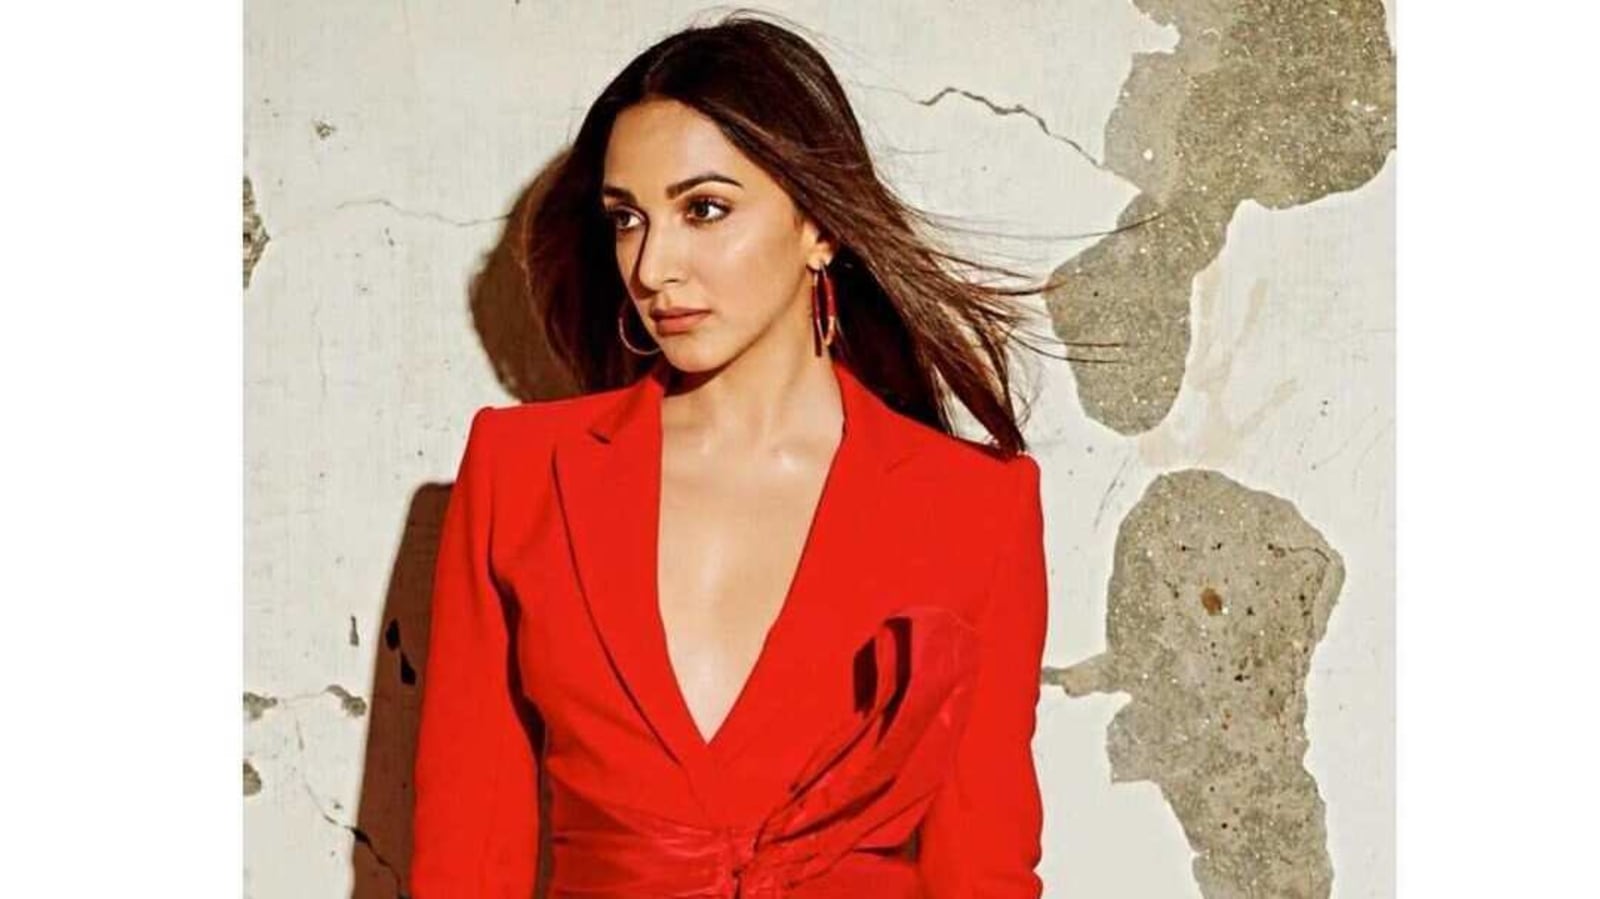 Kiara Advani ups the glamour quotient in red pantsuit